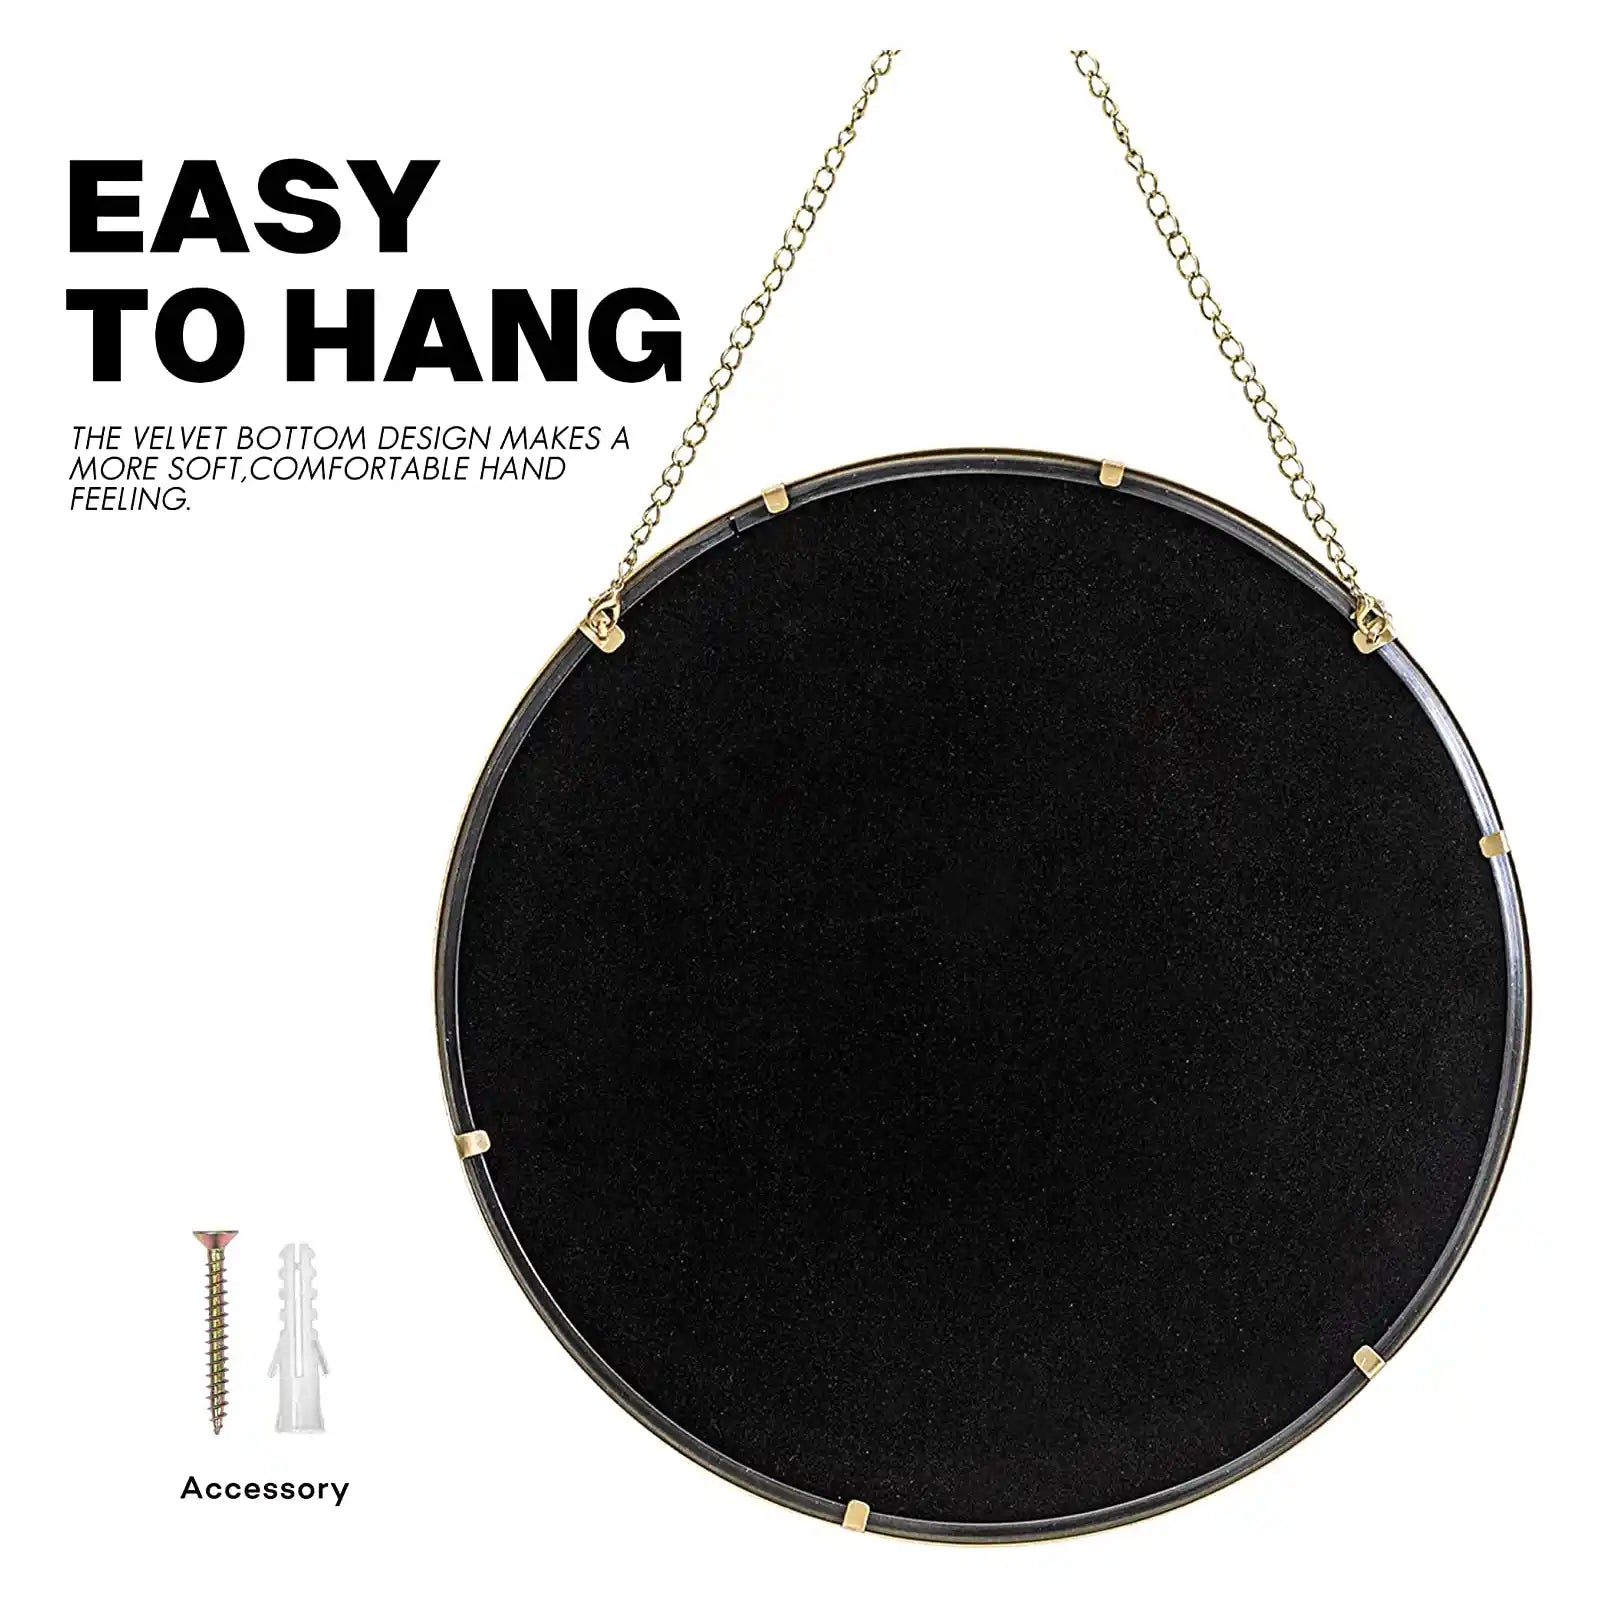 Hanging Circle Mirror Wall Decor Gold Round Mirror with Hanging Chain for Bathroom, Bedroom, Vanity, Living Room, Entryway